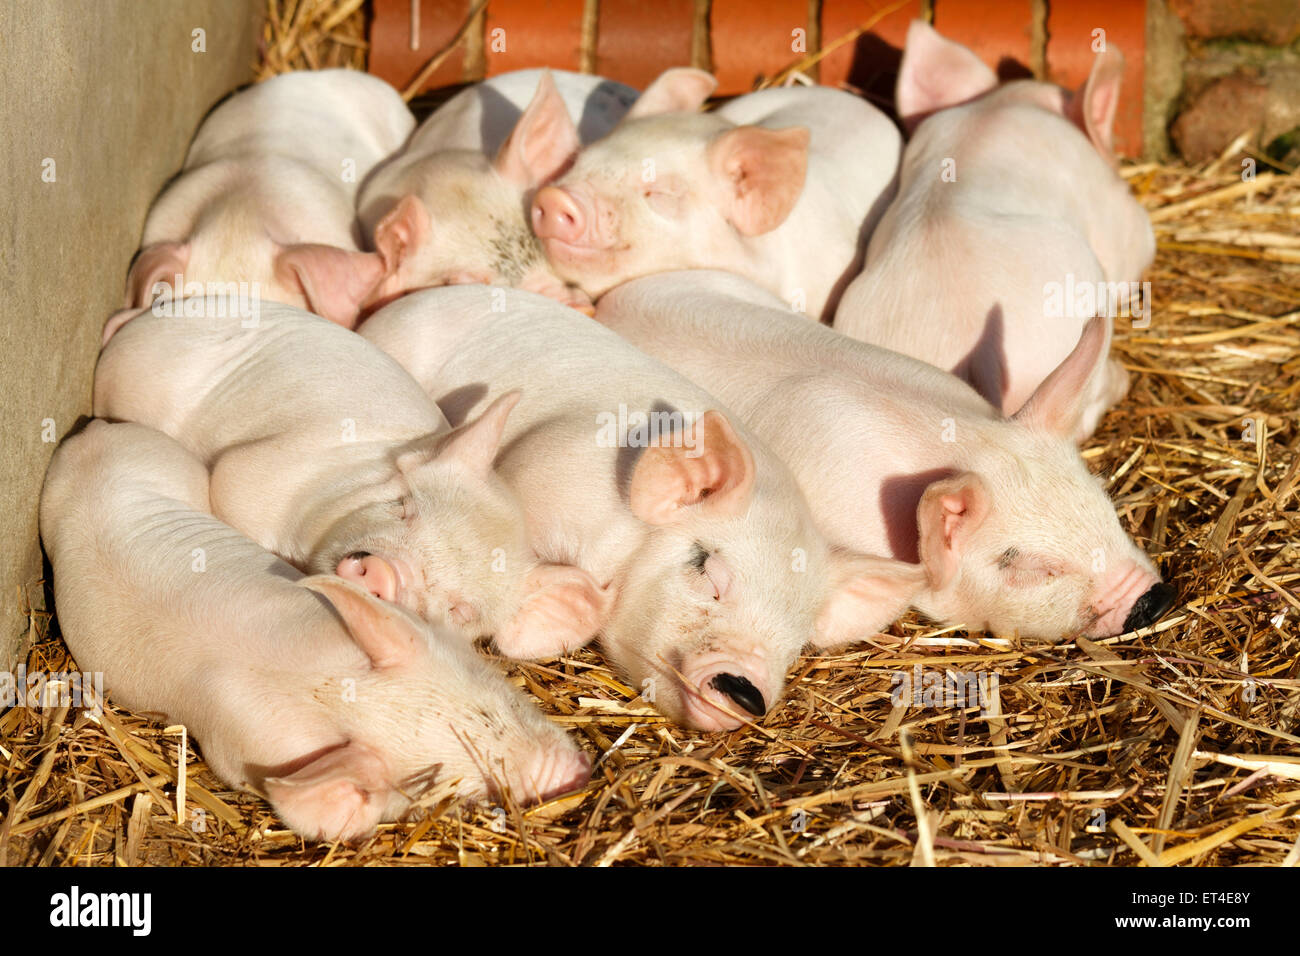 Middle White Piglets sleeping on a bed of straw Stock Photo